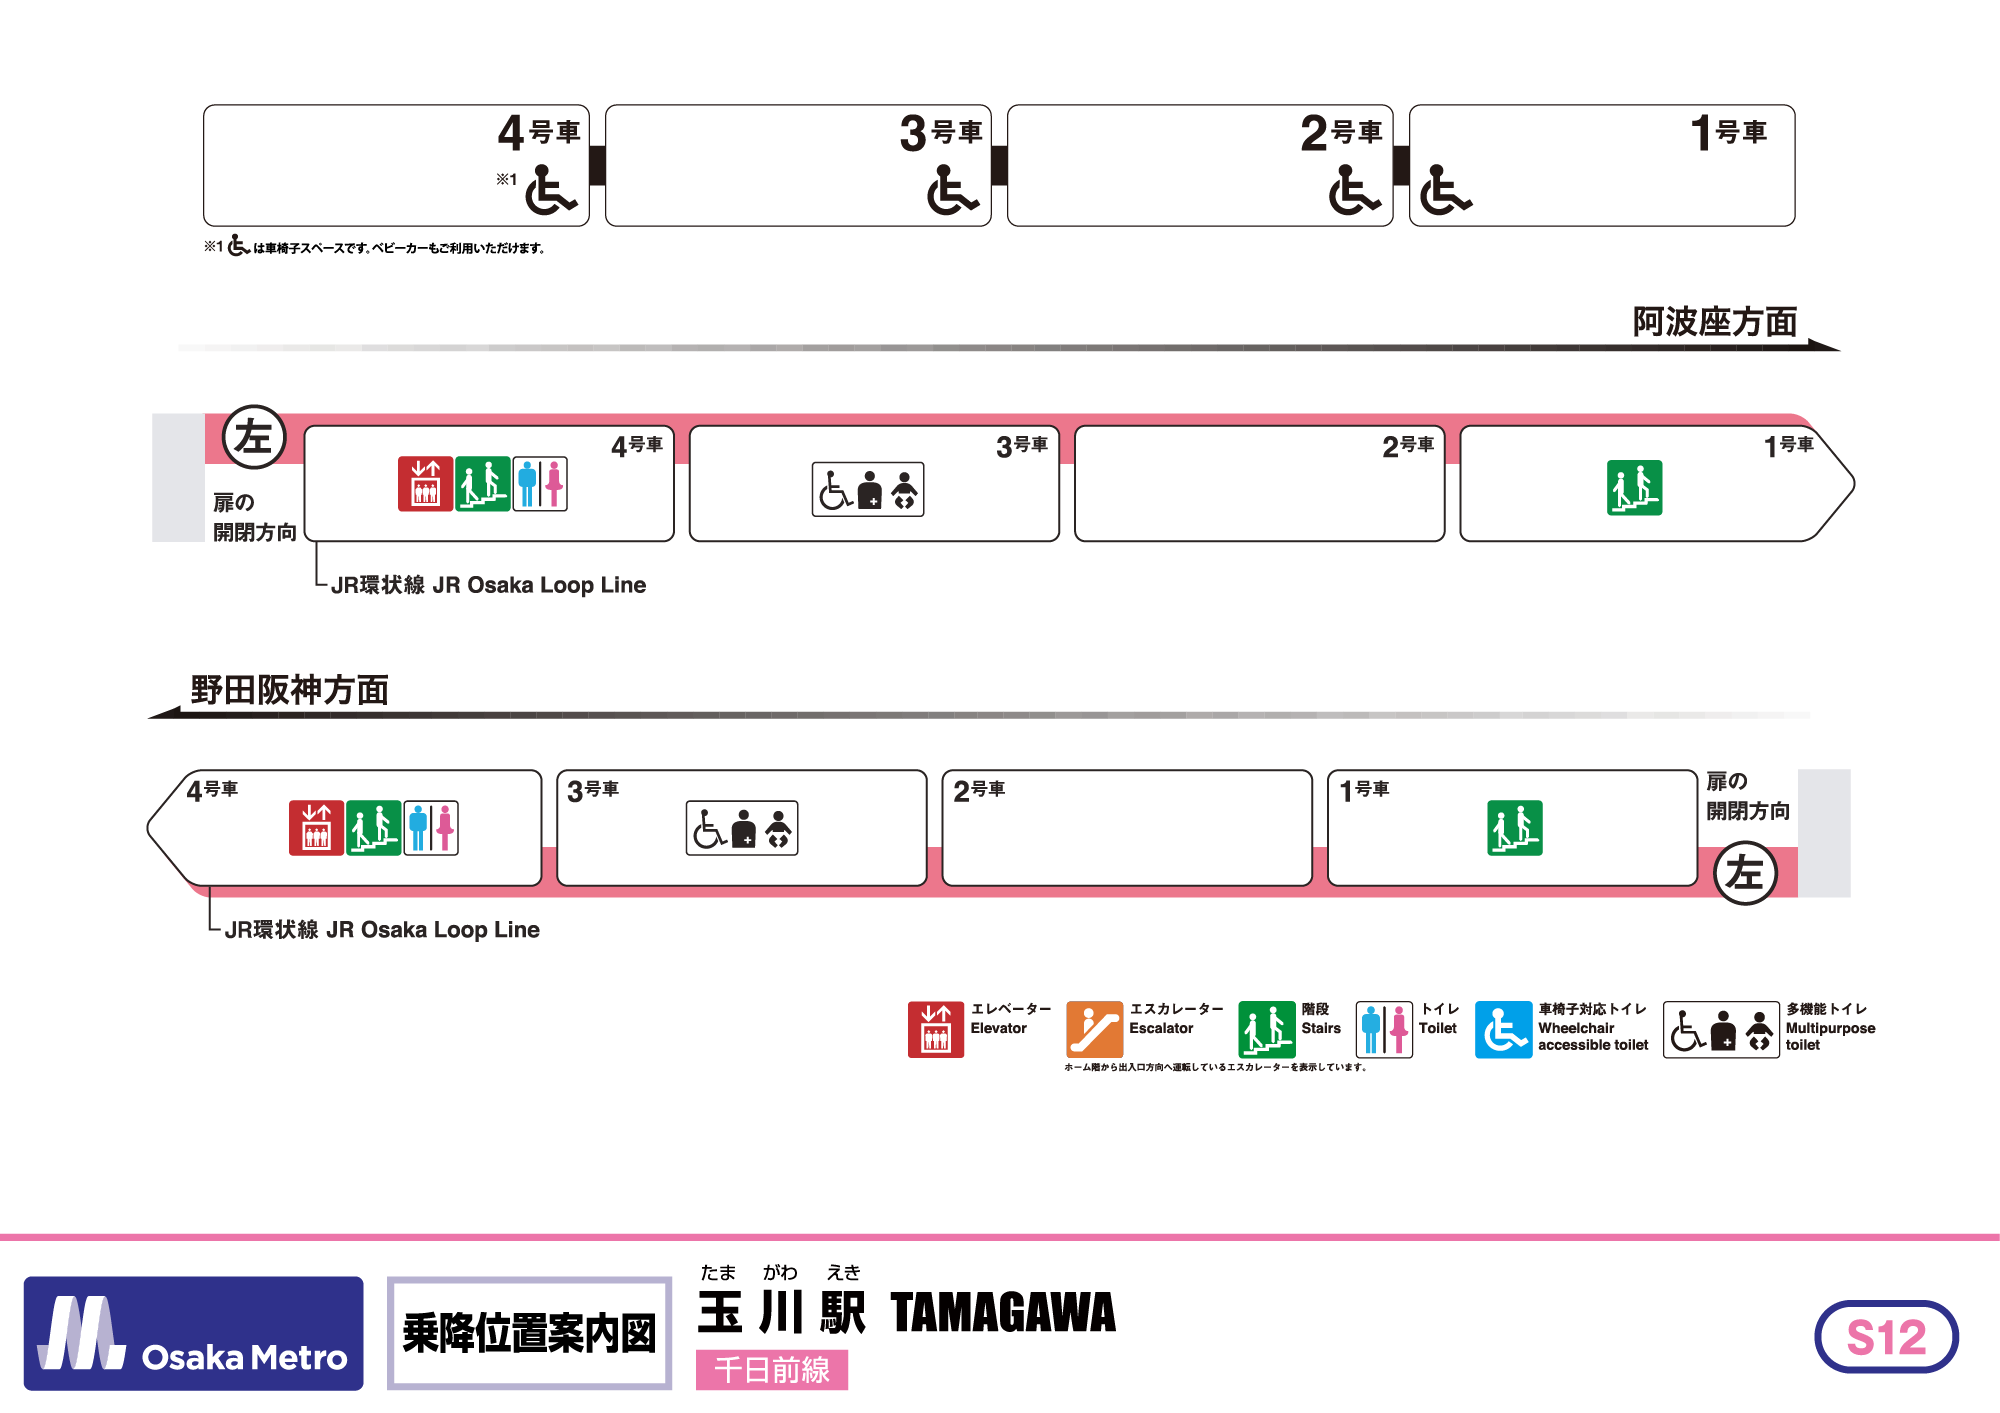 Boarding position map